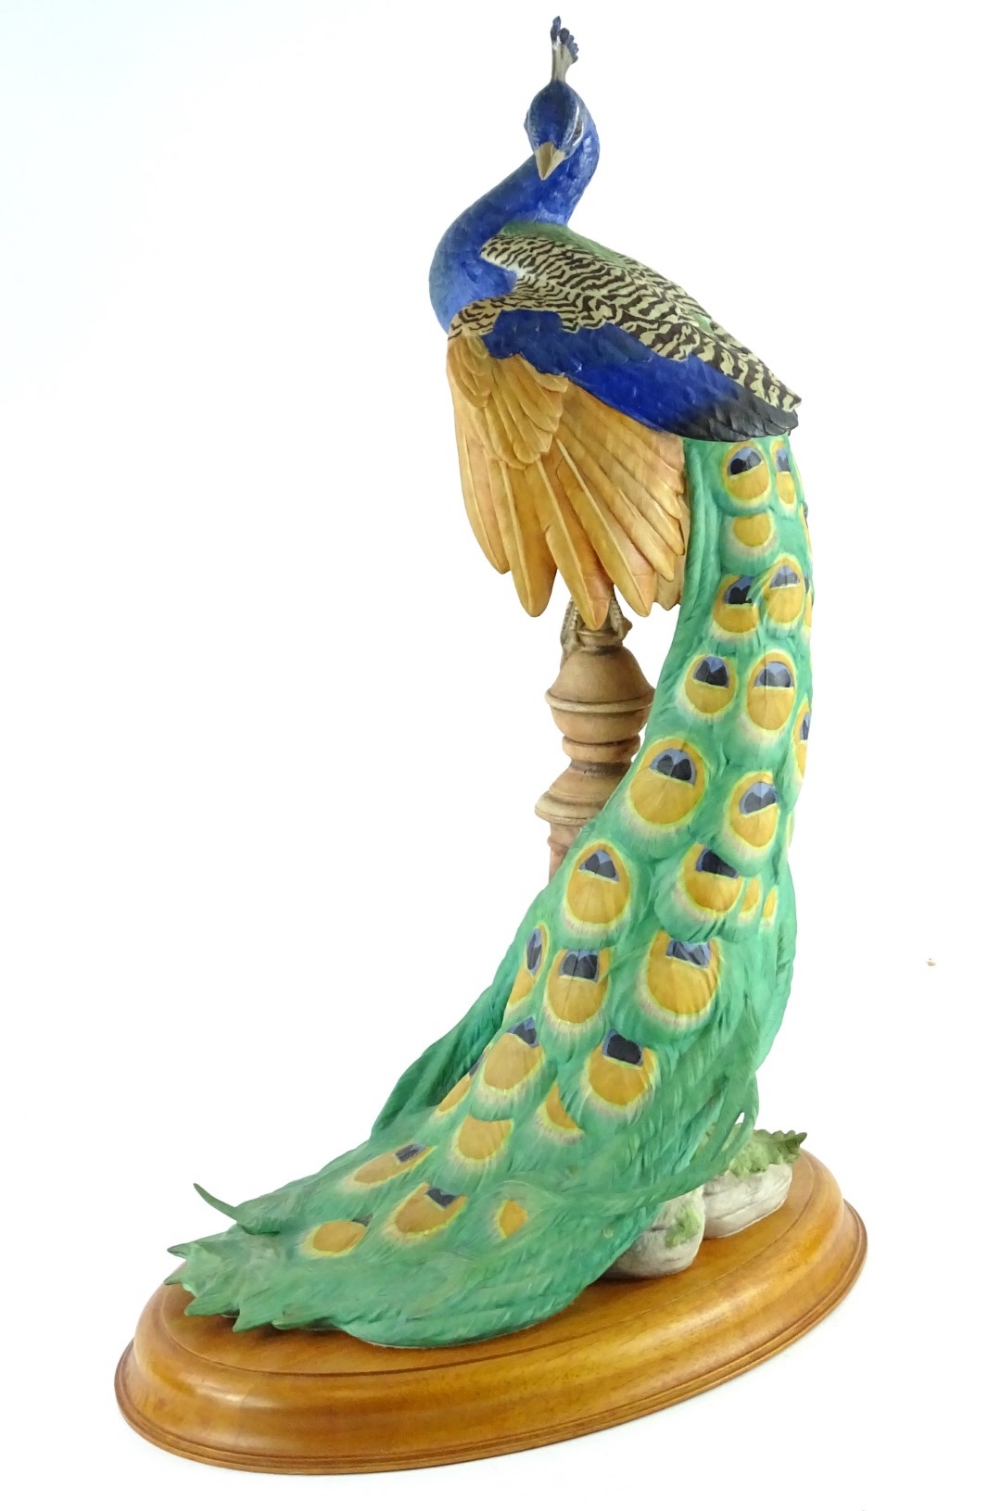 A Franklin Mint bisque porcelain figurine, The Royal Peacock, made for the Royal Society for the